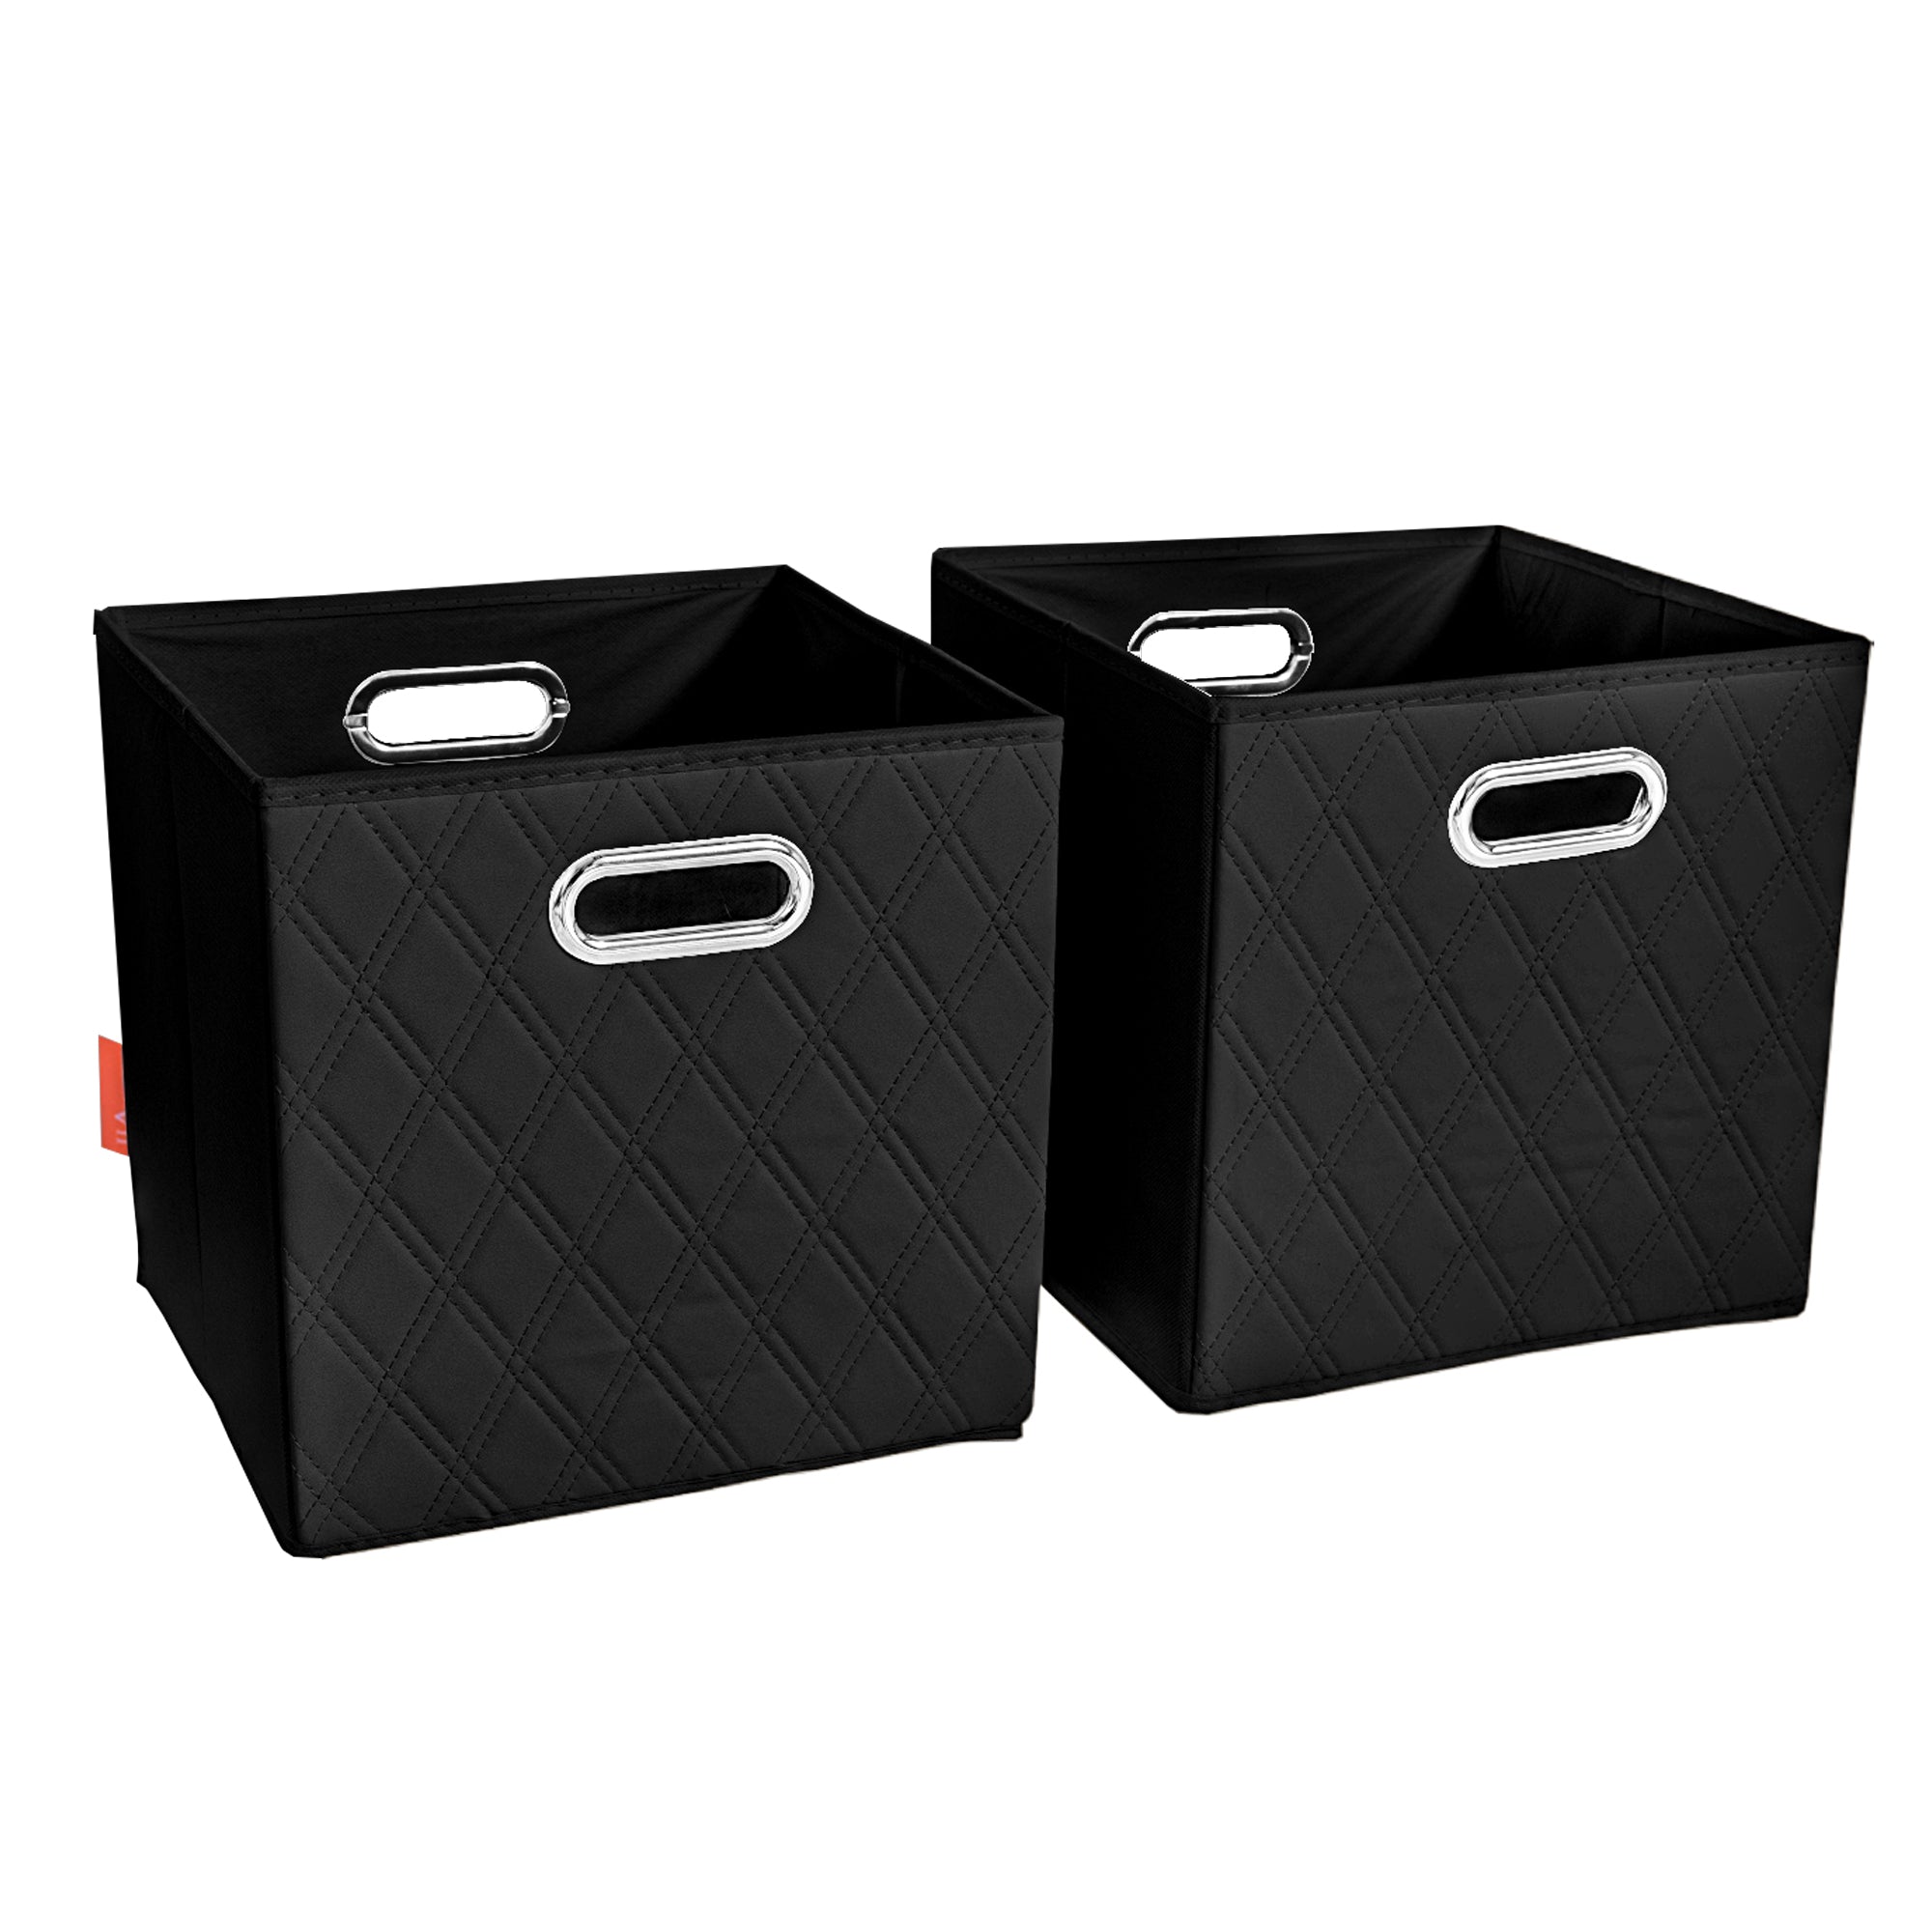 JIAessentials 11 inch Foldable Diamond Patterned Faux Leather Storage Cube Bins Set of Two with Dual Handles - 11" Black